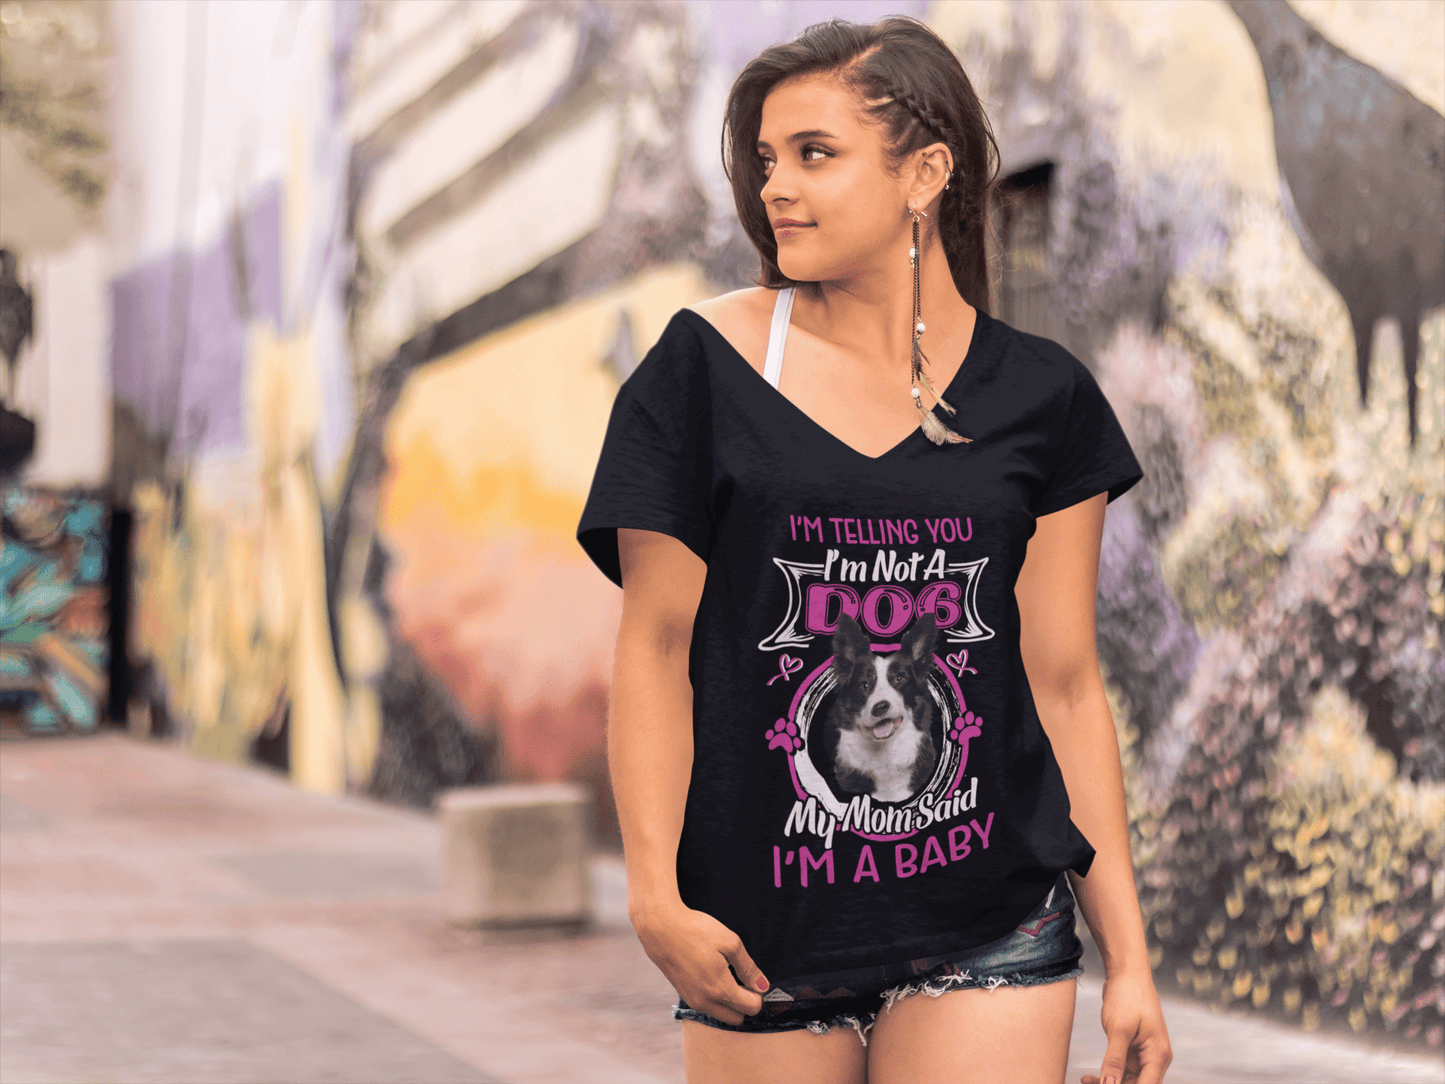 ULTRABASIC Women's T-Shirt I'm Telling You I'm Not a Border Collie - My Mom Said I'm a Baby - Cute Puppy Dog Lover Tee Shirt